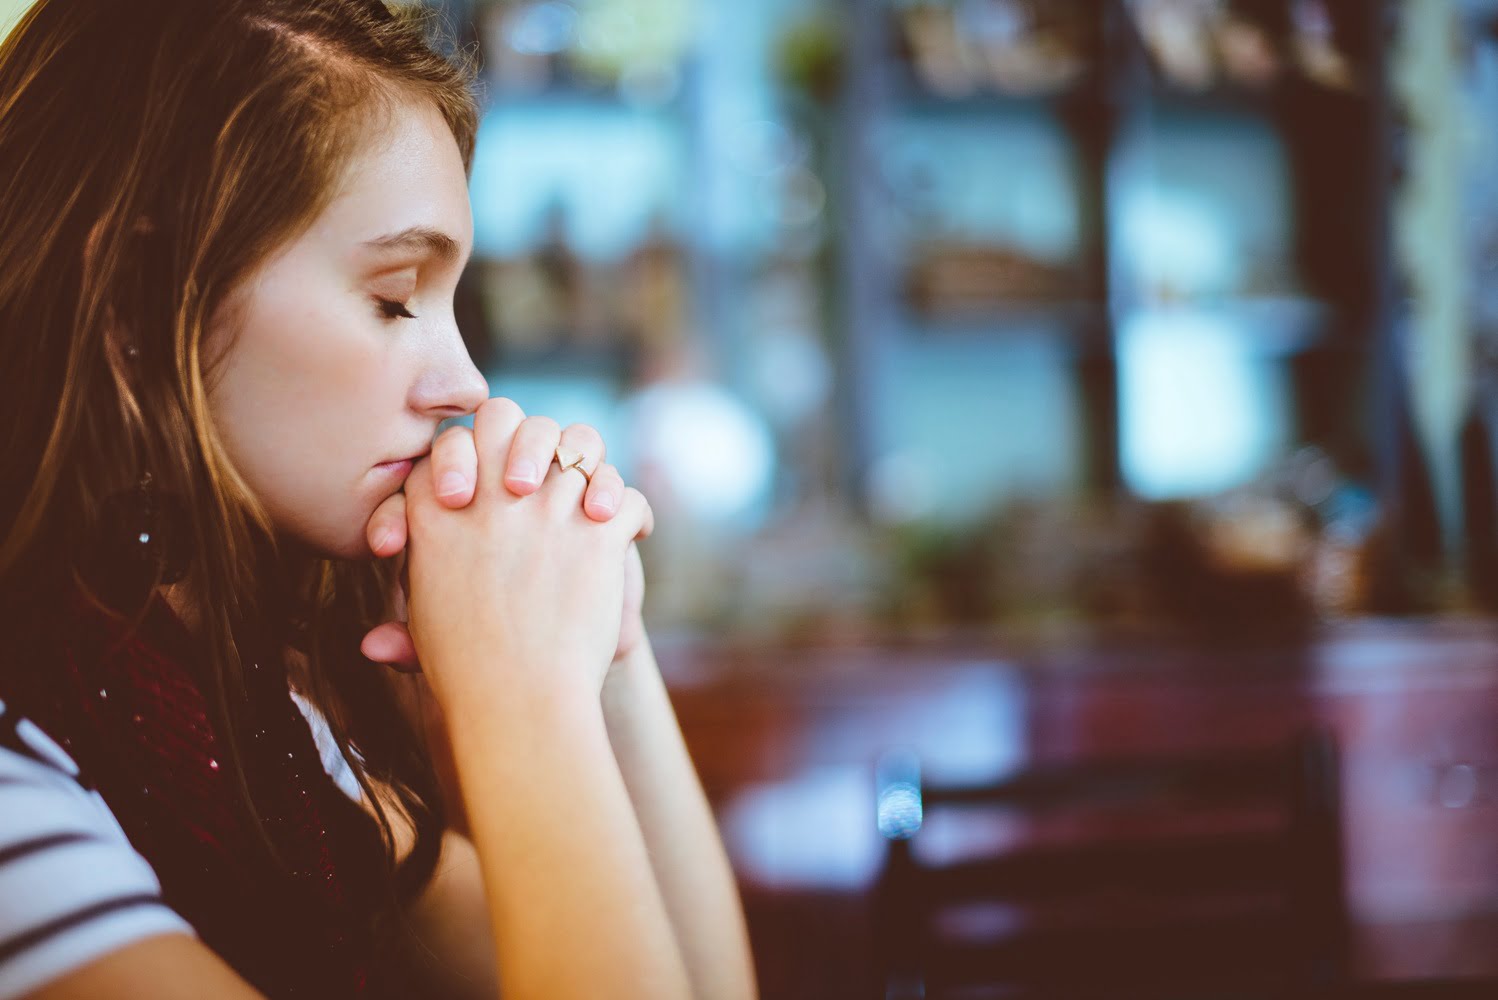 How to Cope with Anxiety Using Scripture and Meditative Practices